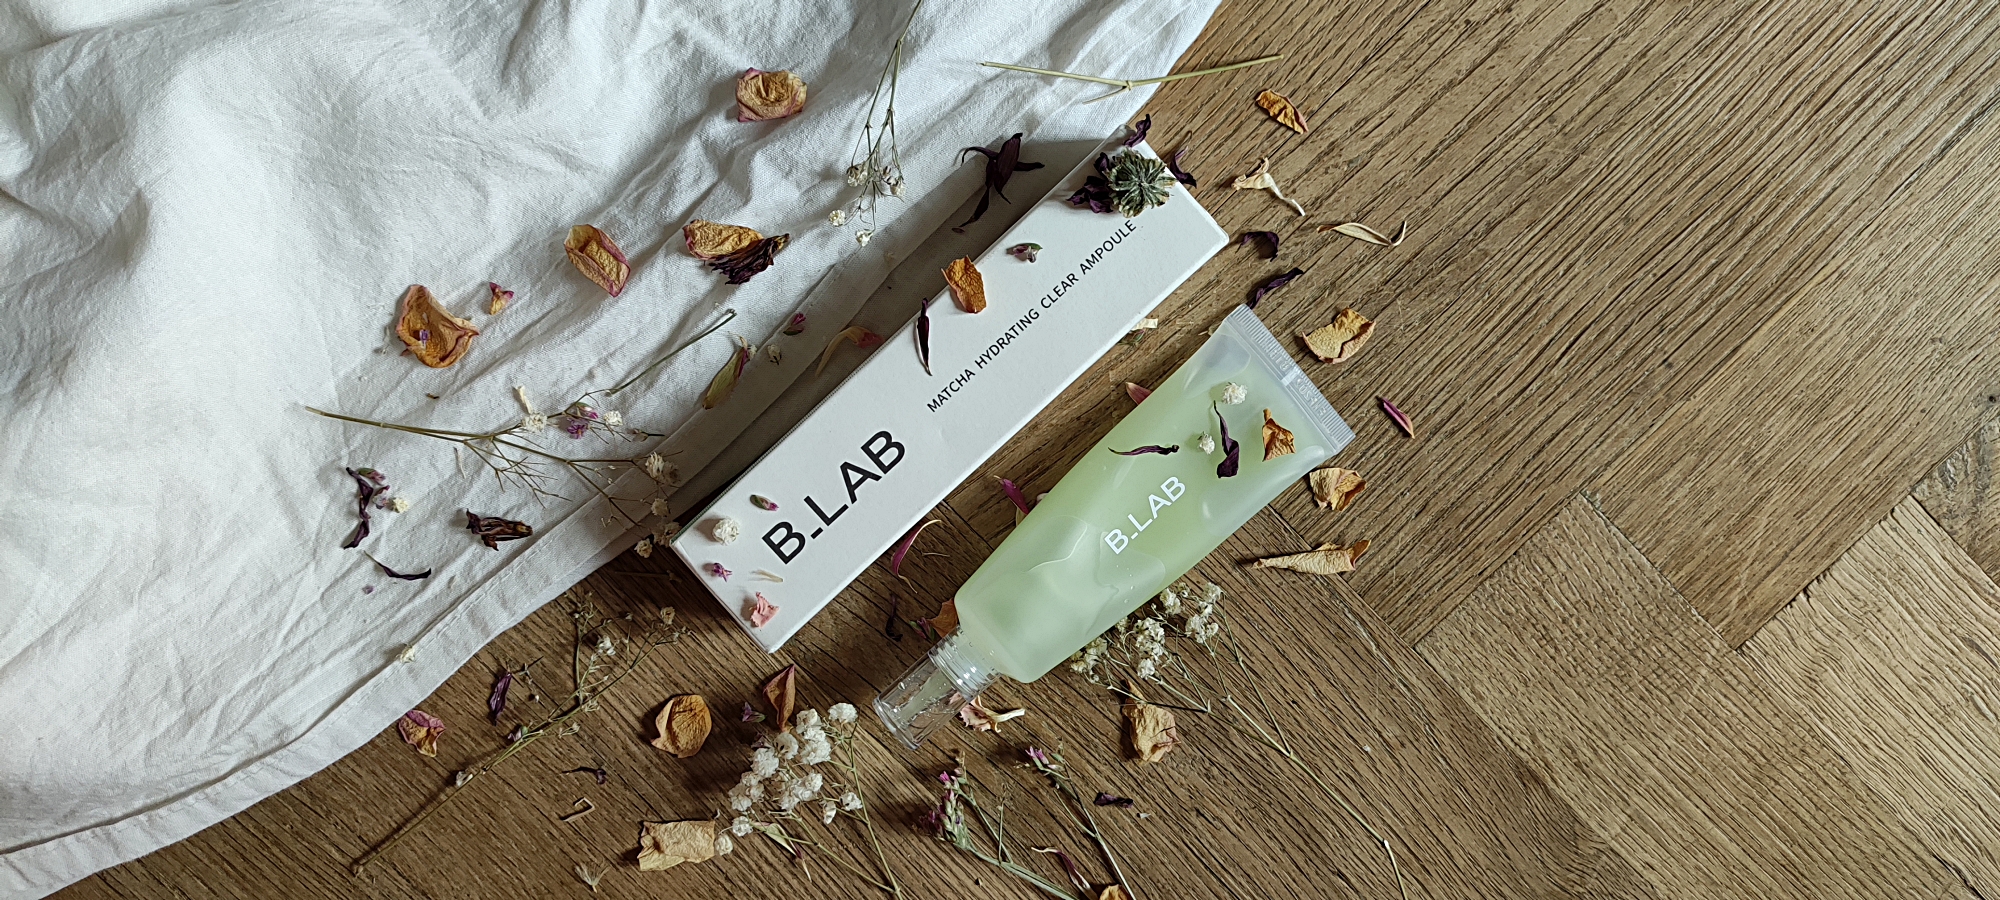 B.LAB Matcha Hydrating Clear Ampoule review